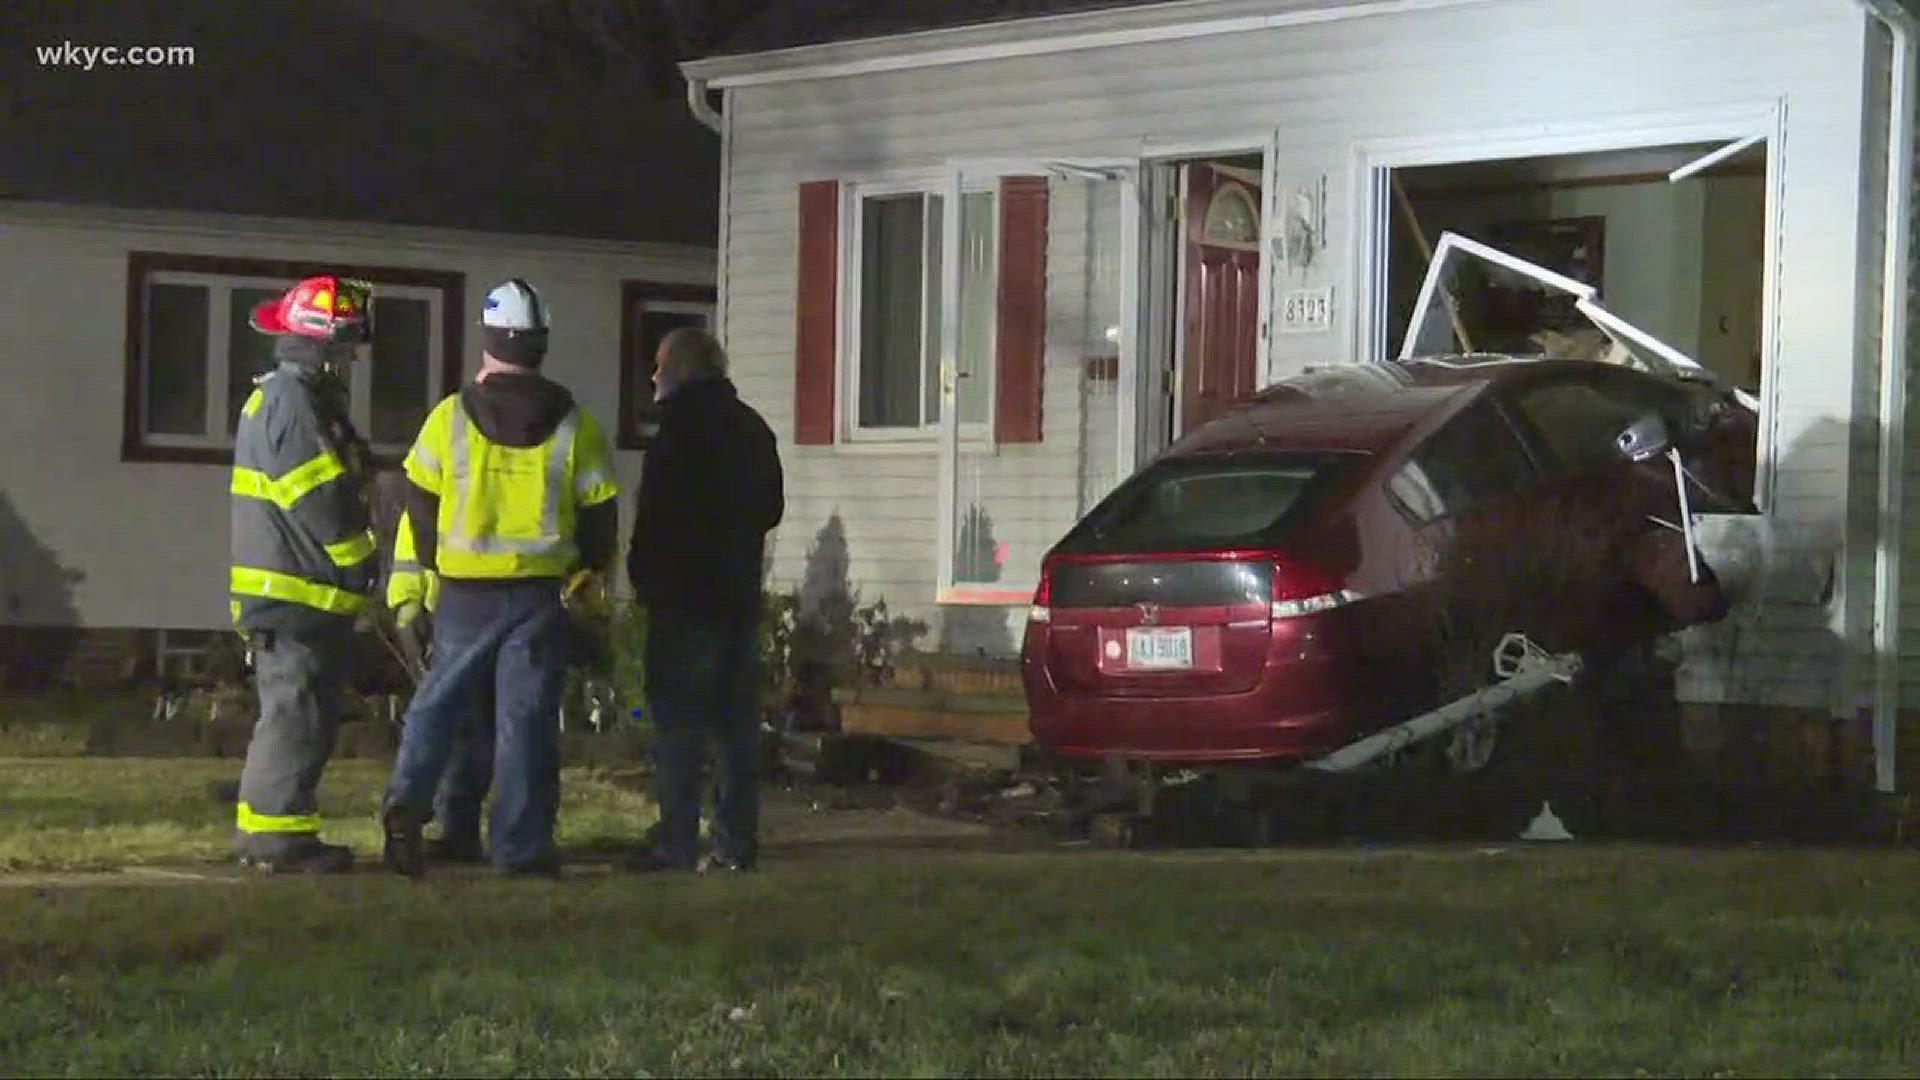 Feb. 22, 2018: Police are investigating after a car crashed into a home. The vehicle was driving on Thornton near Twin Lakes Drive when it failed to stop at the stop sign -- smashing right into the home's living room, according to authorities.